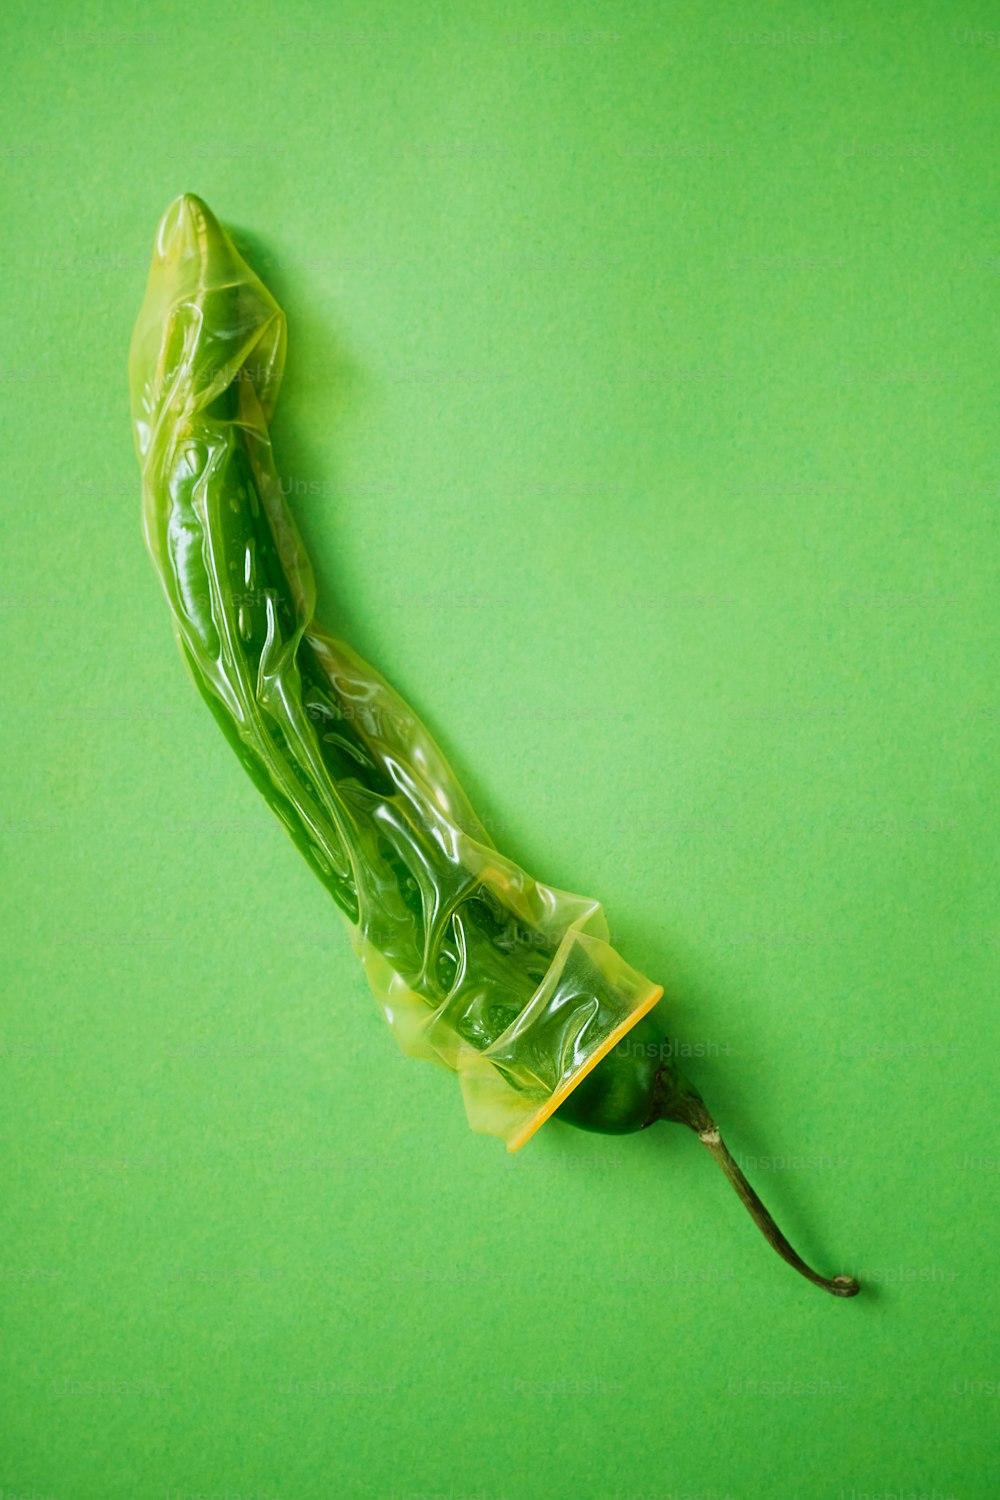 a green vegetable wrapped in plastic on a green background